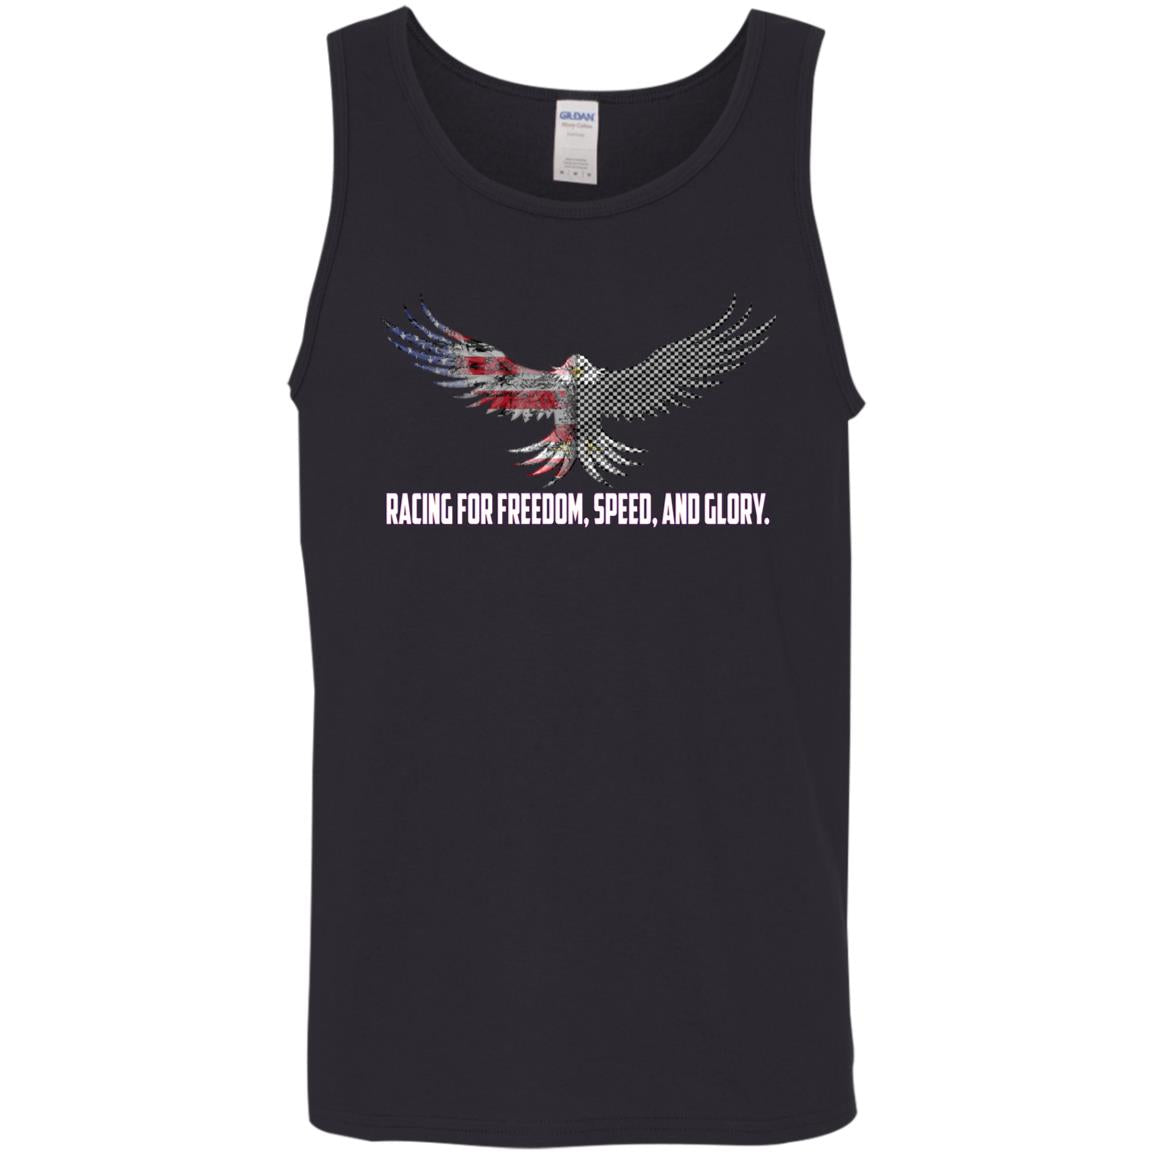 Racing For Freedom, Speed, And Glory Cotton Tank Top 5.3 oz.